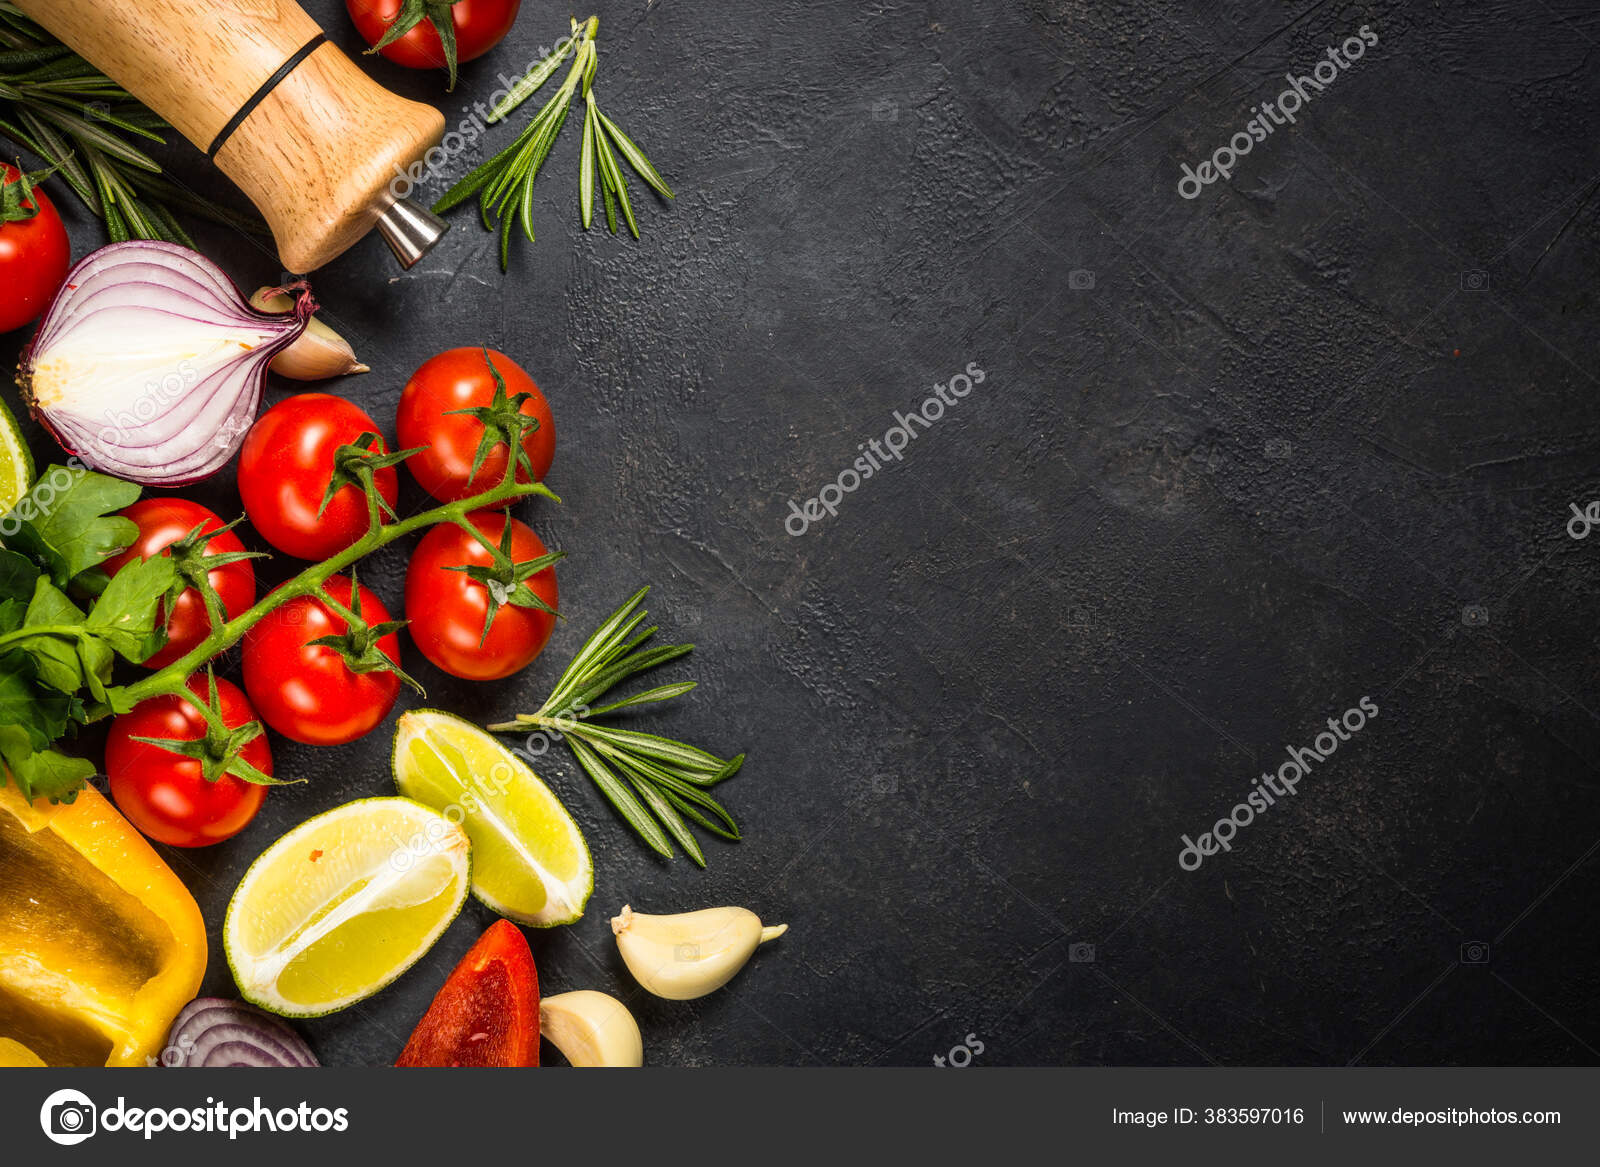 Food cooking background on black kitchen table Stock Photo by Nadianb